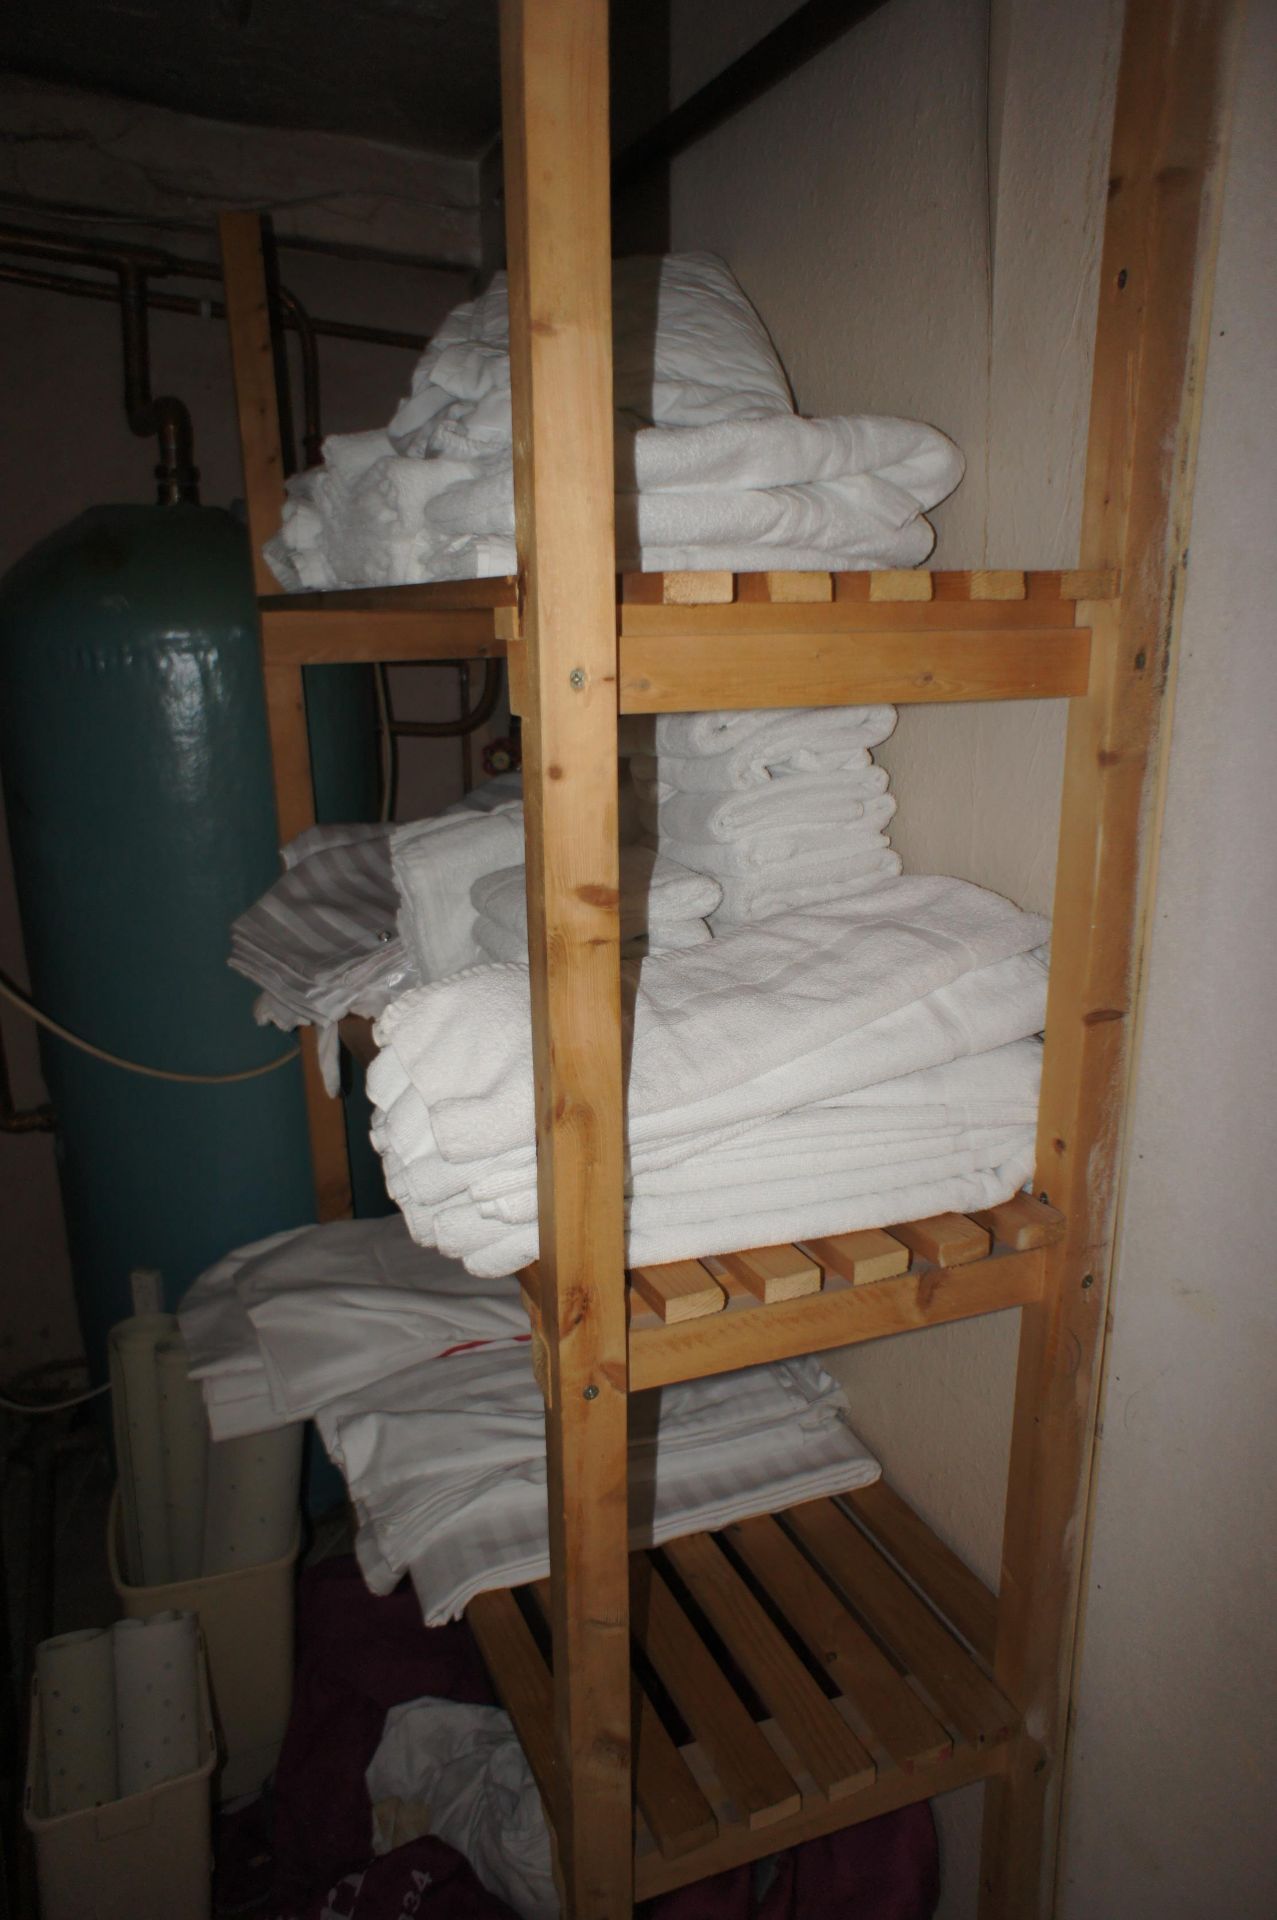 Contents to cupboard including towels & bed linen - Image 7 of 8